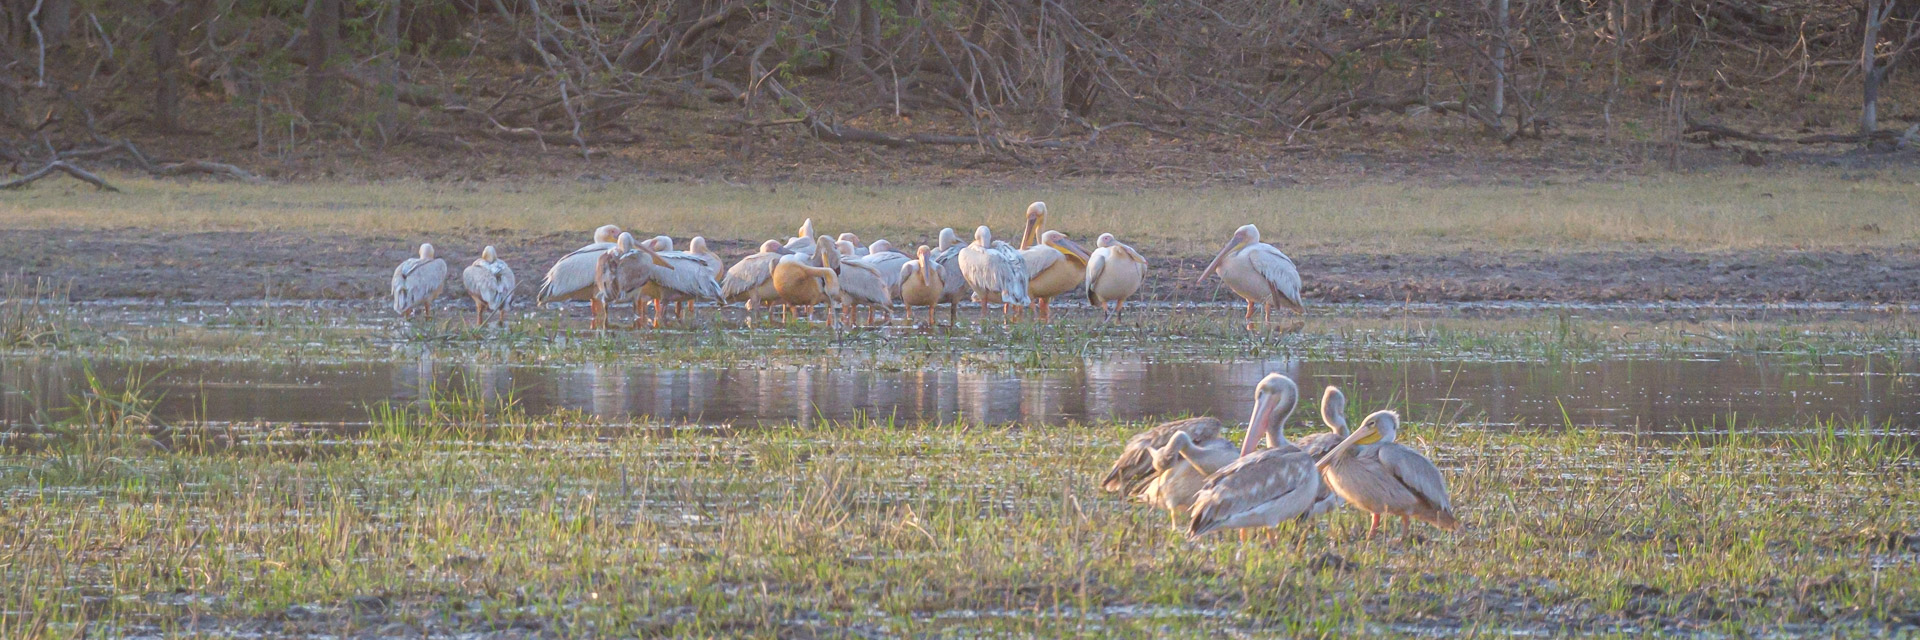 23.9.2022 - Moremi Khwai, Morning Drive, Pink-backed Pelican & Great White Pelican